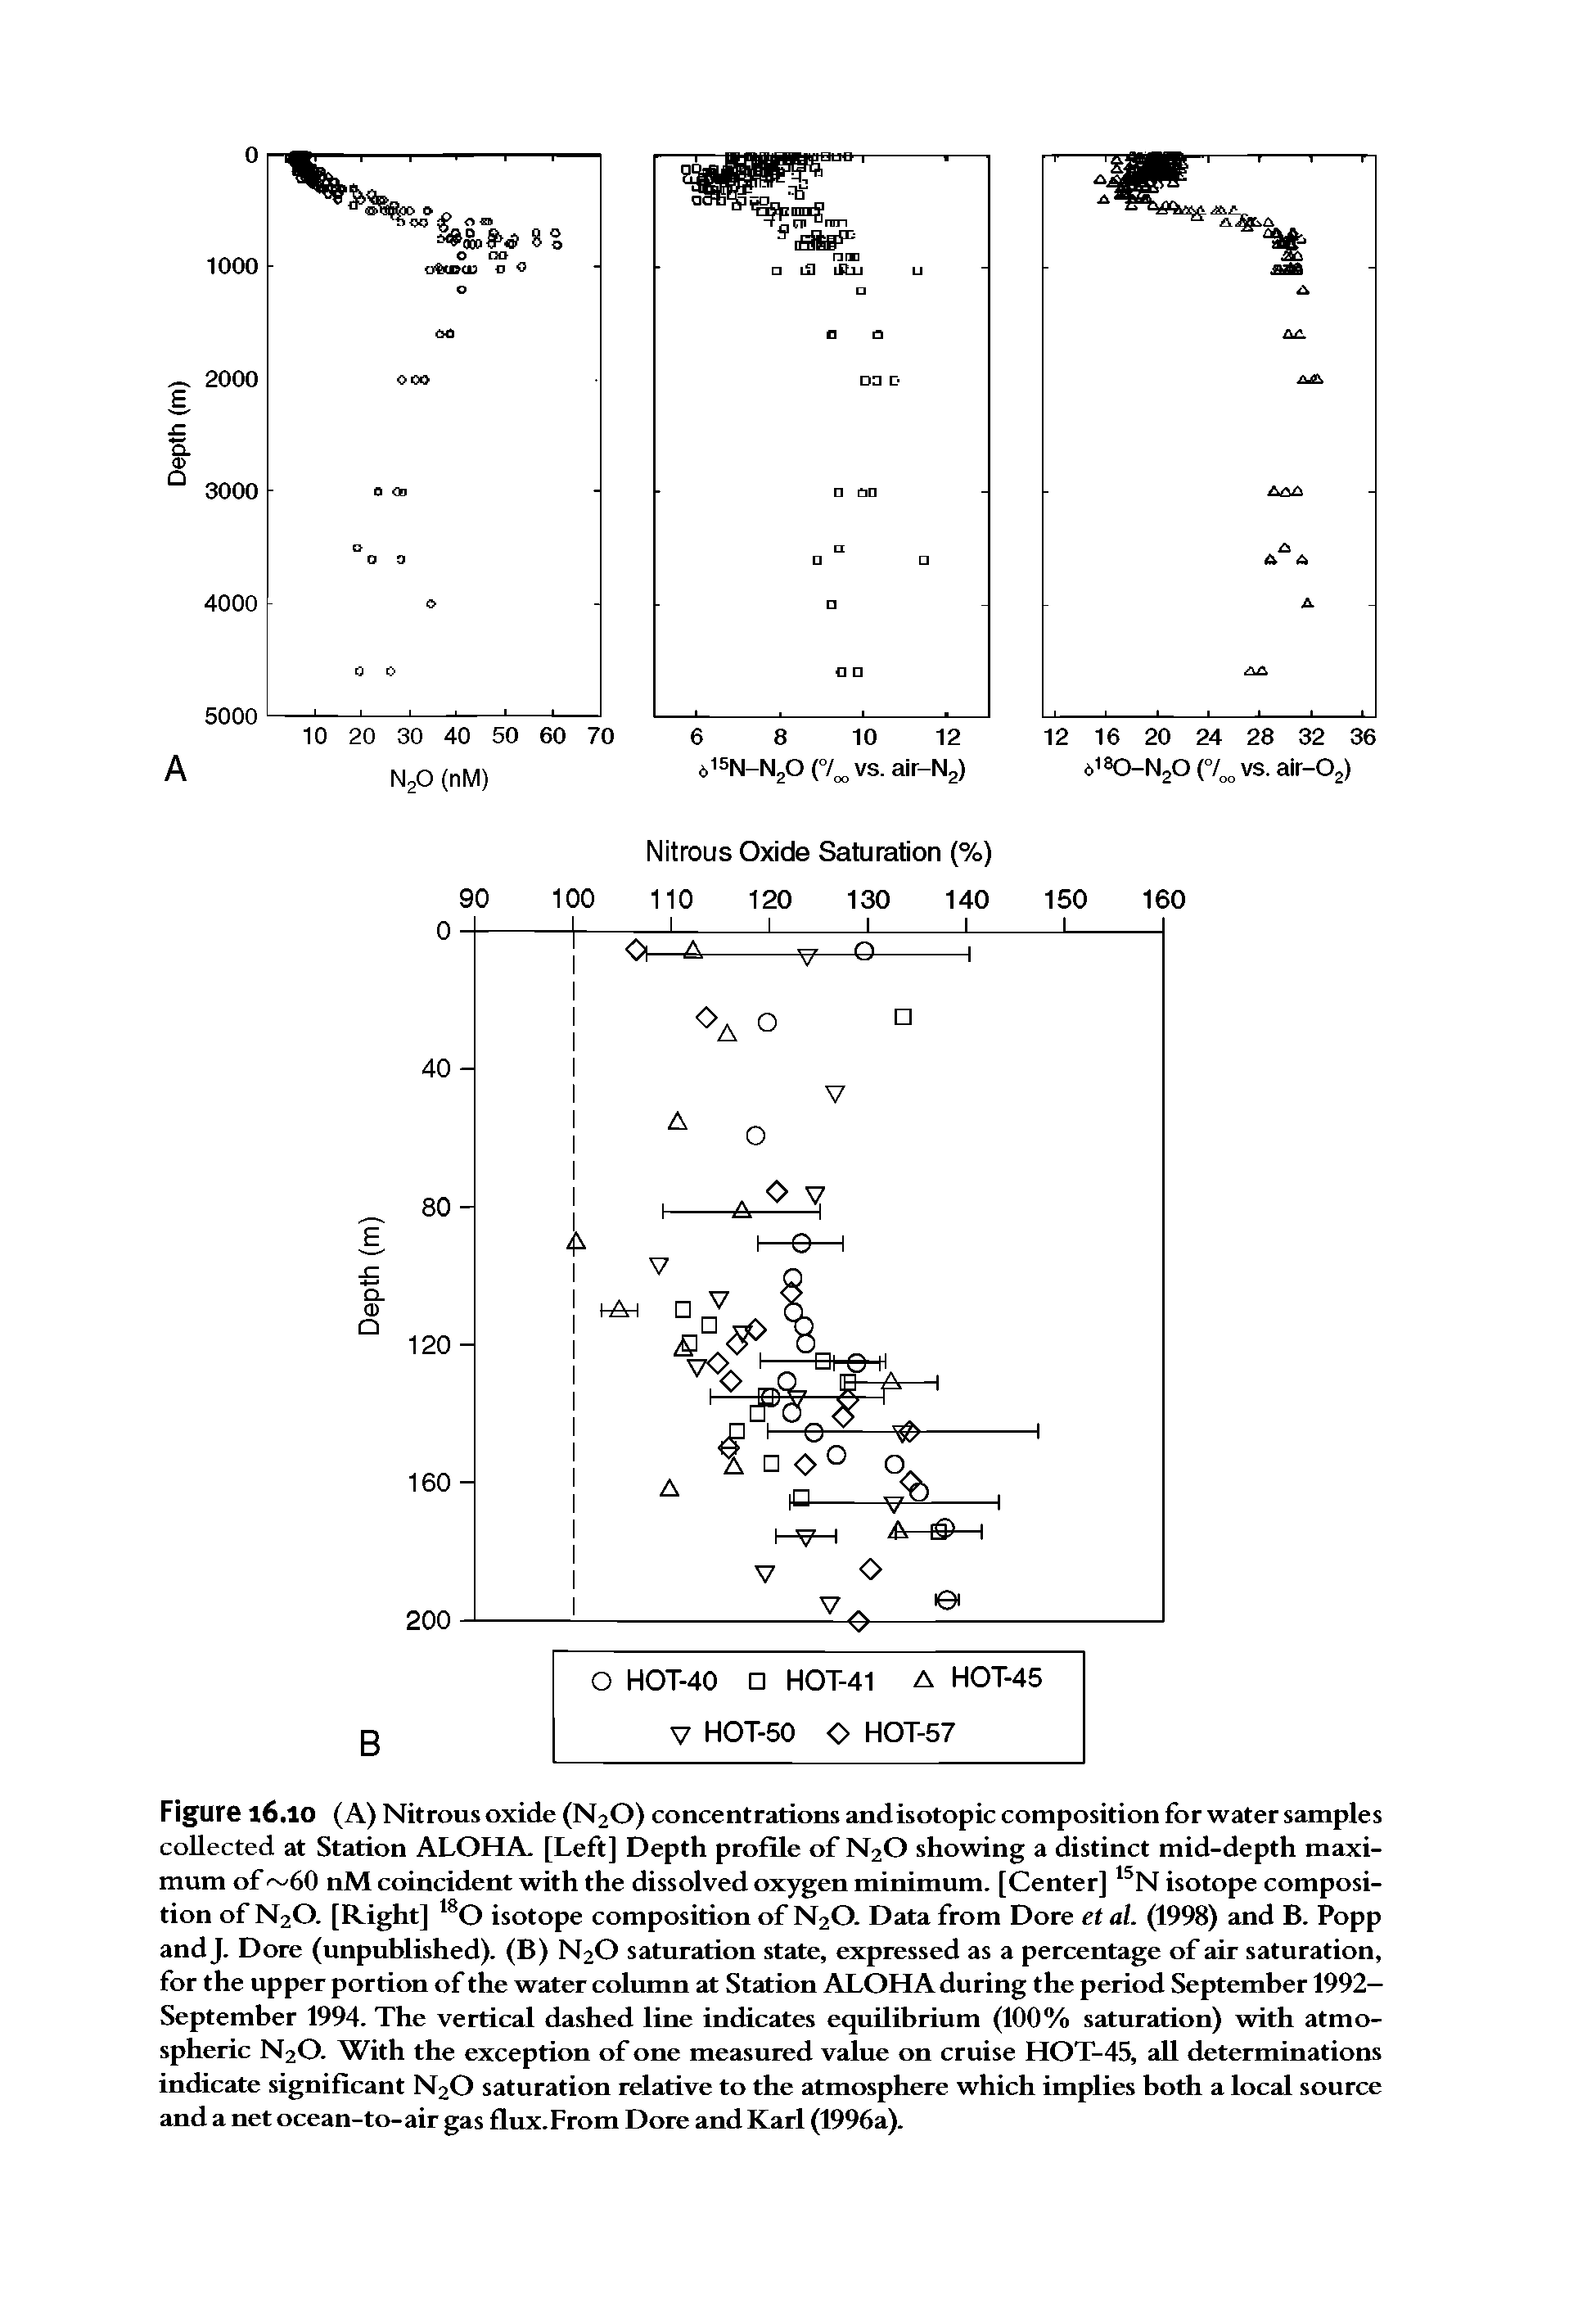 Figure 16.10 (A) Nitrous oxide (N2O) concentrations and isotopic composition for water samples collected at Station ALOHA. [Left] Depth profile of N2O showing a distinct mid-depth maximum of 60 nM coincident with the dissolved oxygen minimum. [Center] N isotope composition of N2O. [Right] 0 isotope composition of N2O. Data from Dore et al. (1998) and B. Popp and J. Dore (unpublished). (B) N2O saturation state, expressed as a percentage of air saturation, for the upper portion of the water column at Station ALOHA during the period September 1992— September 1994. The vertical dashed line indicates equilibrium (100% saturation) with atmospheric N2O. With the exception of one measured value on cruise HOT-45, all determinations indicate significant N2O saturation relative to the atmosphere which implies both a local source and a net ocean-to-air gas flux.From Dore and Karl (1996a).